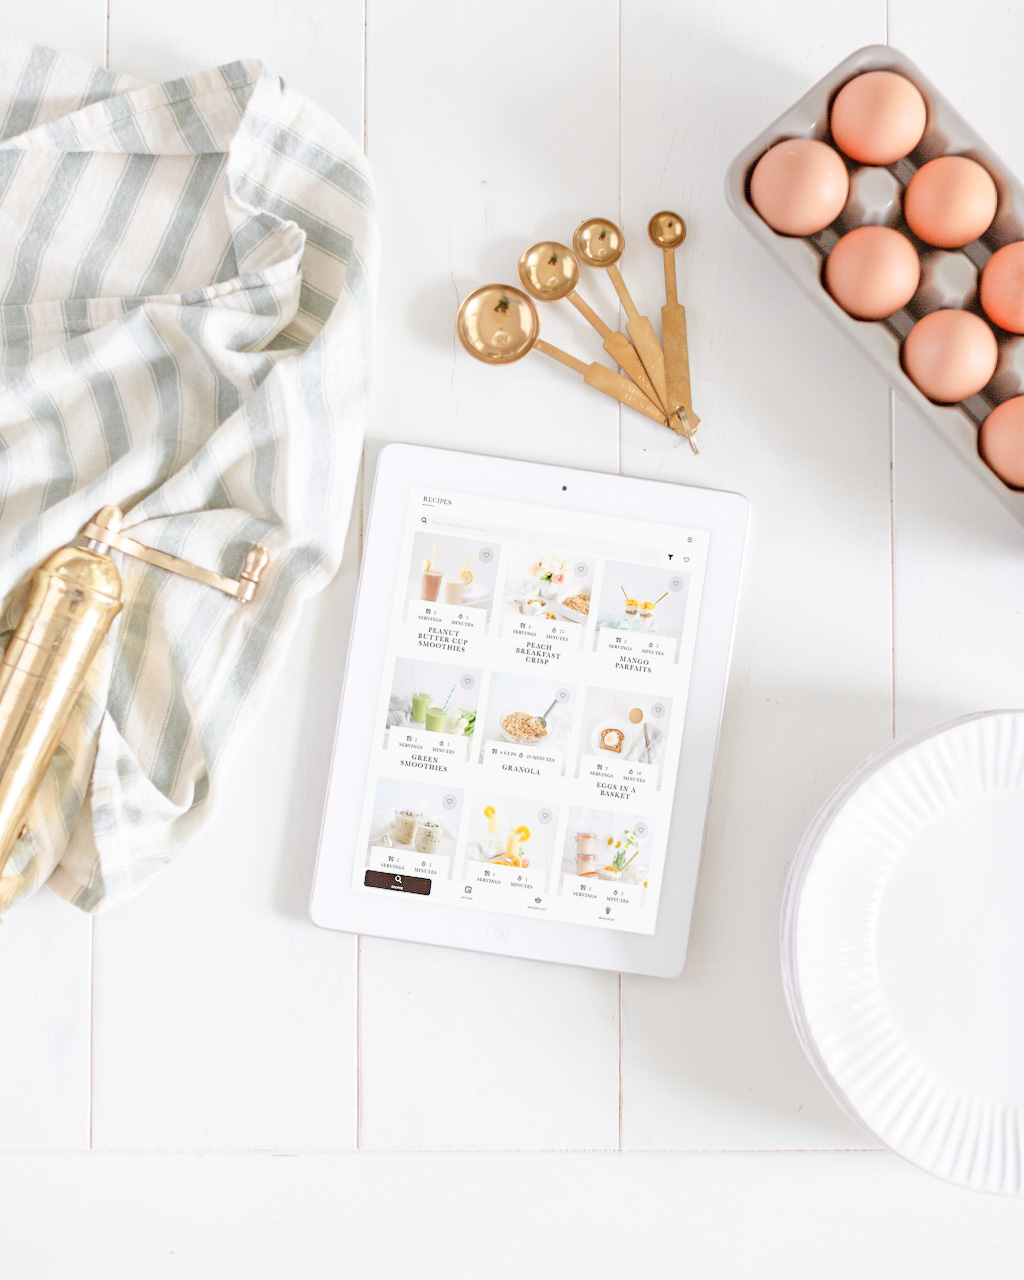 ipad in kitchen with eggs and measuring spoons